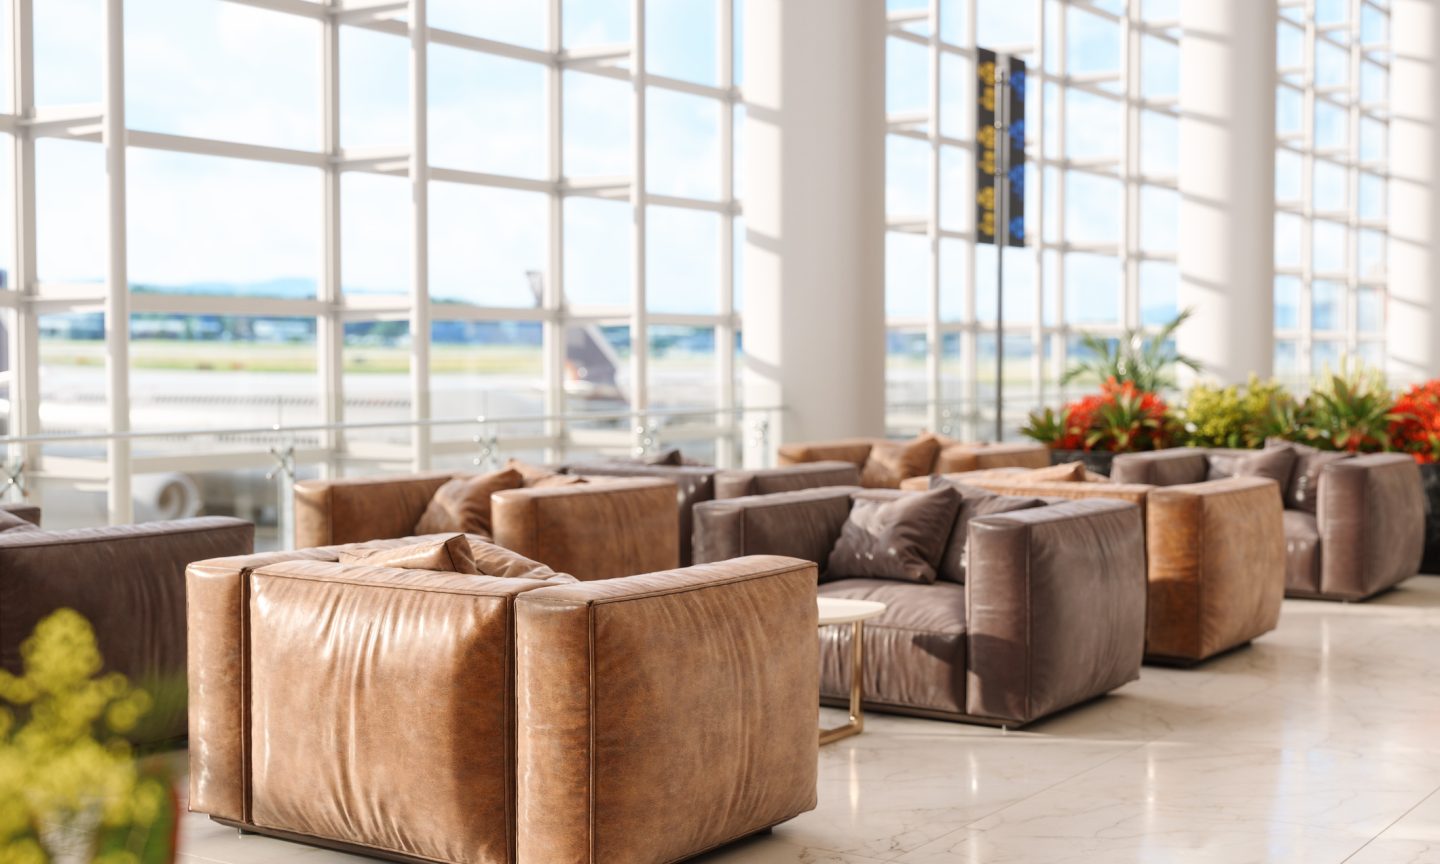 Charlotte Airport Lounges: What to Know – NerdWallet